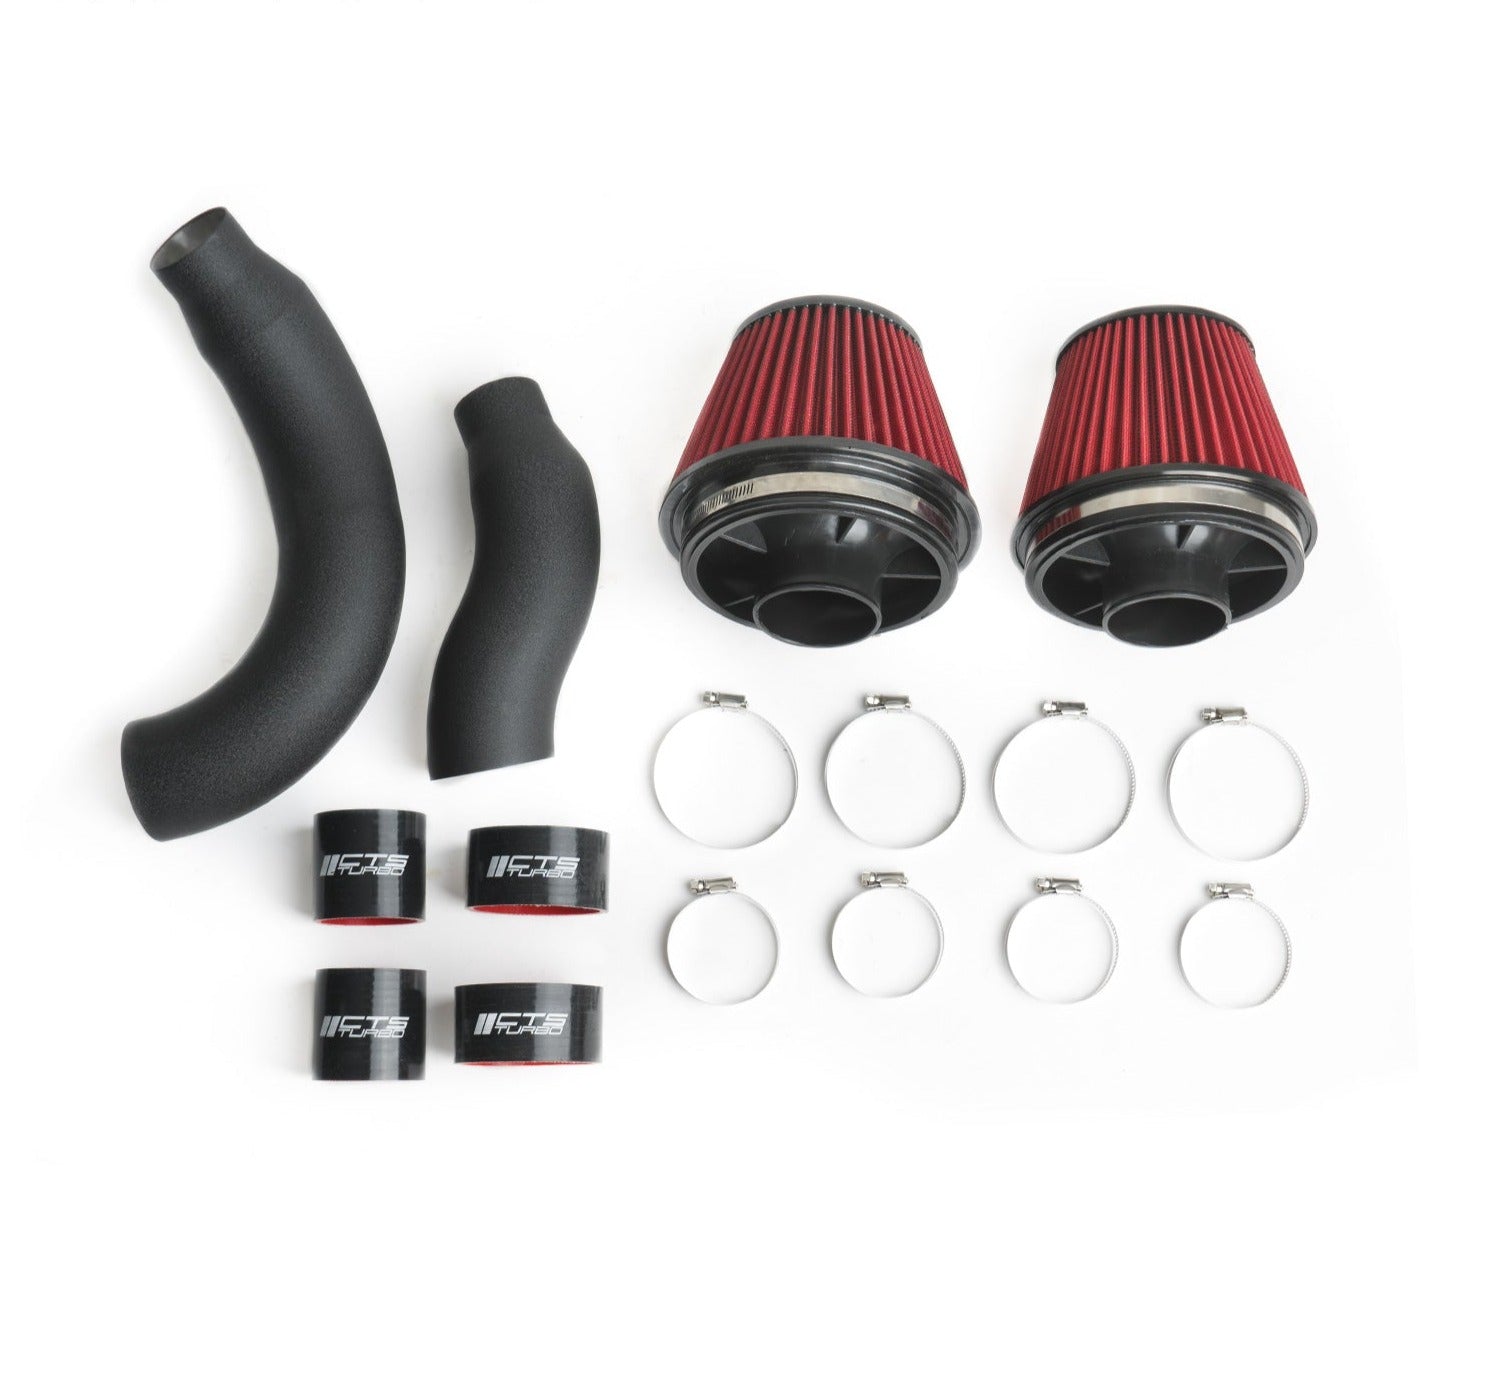 CTS Turbo Dual 3" Intake Kit With 6" Velocity Stack - Audi C7 S6/S7/RS6/RS7